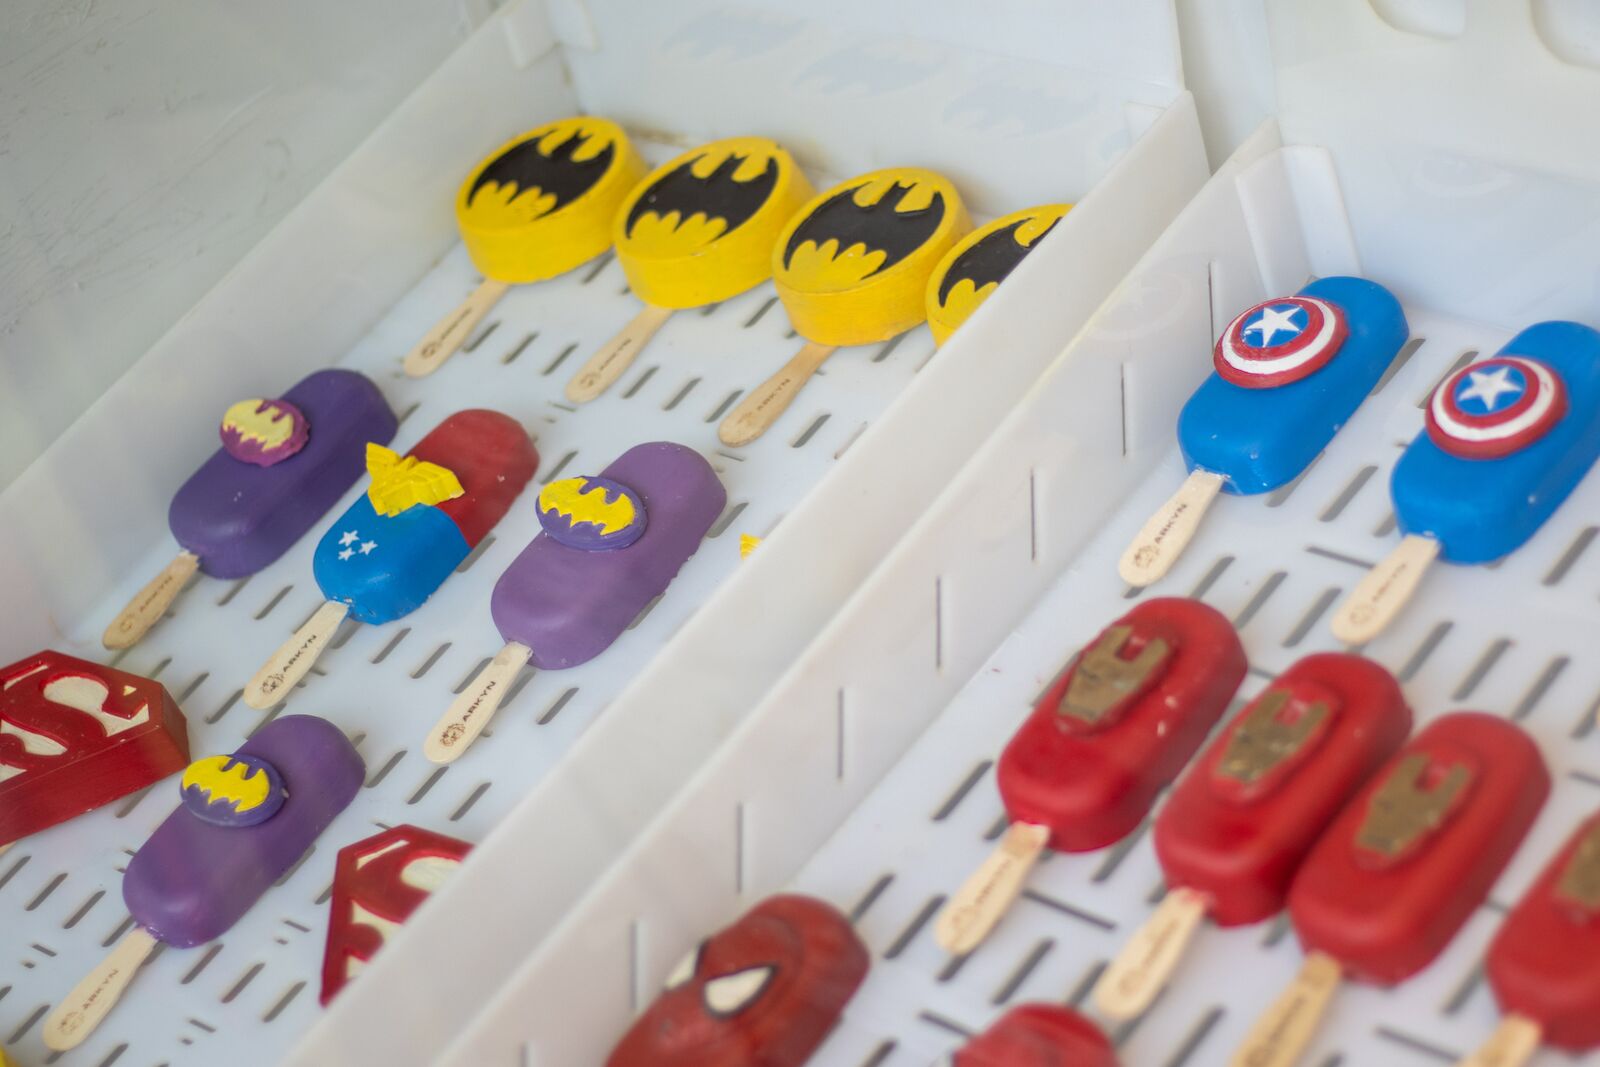 ArkynHelados-ice cream display-comic book cafes